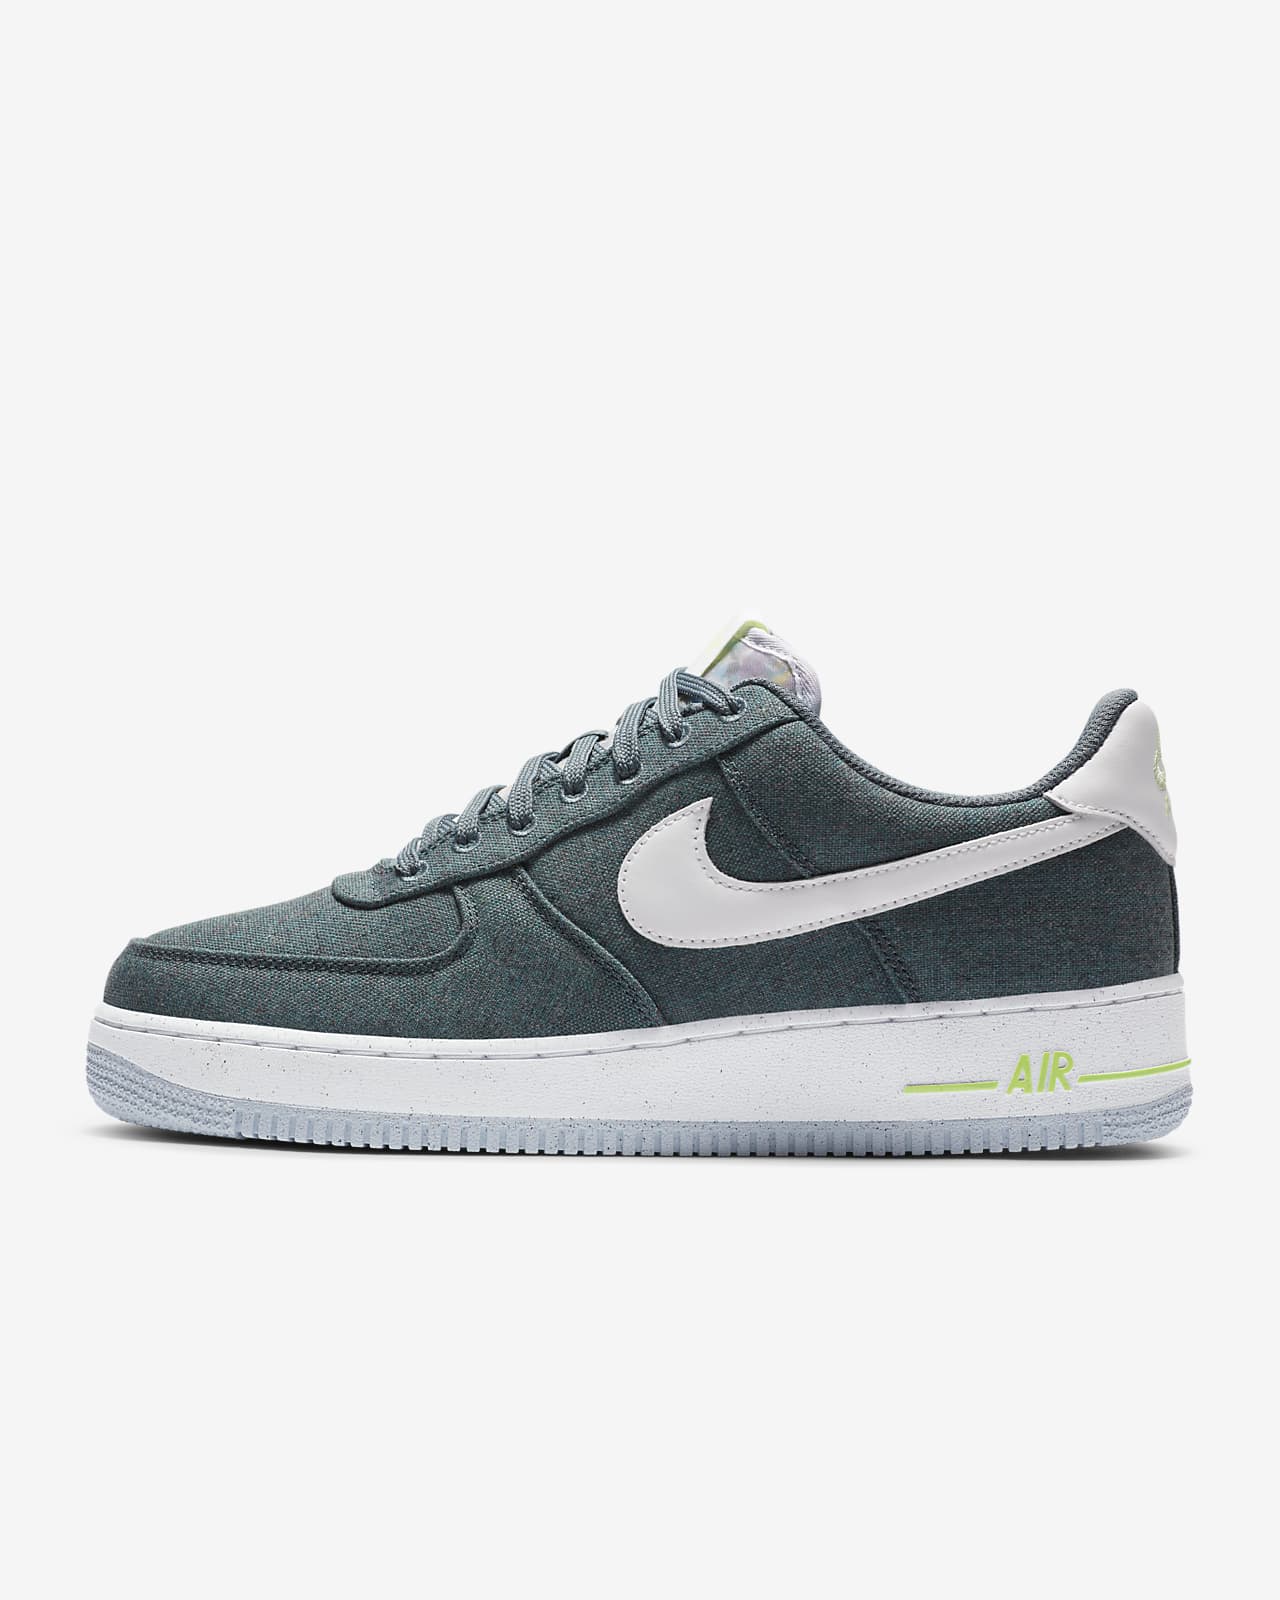 mike air force 1 07